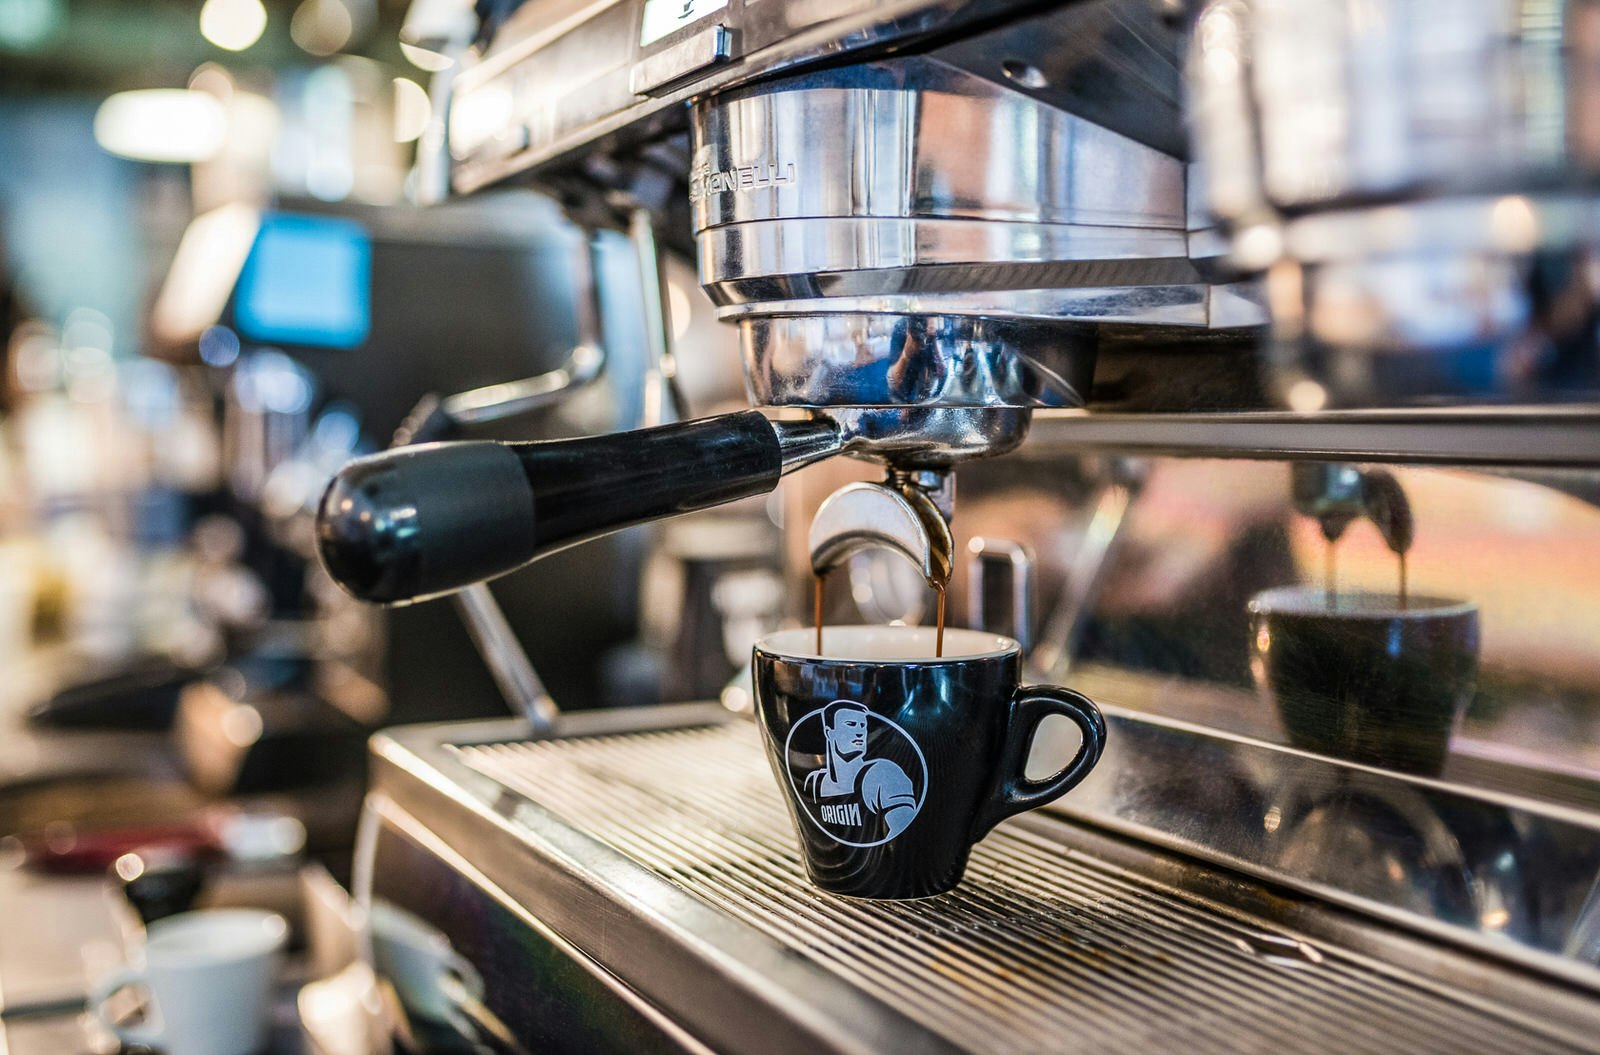 Espresso pours out of a large chrome coffee machine in two streams; both ball into a small black cup with an Origin logo (a barista)